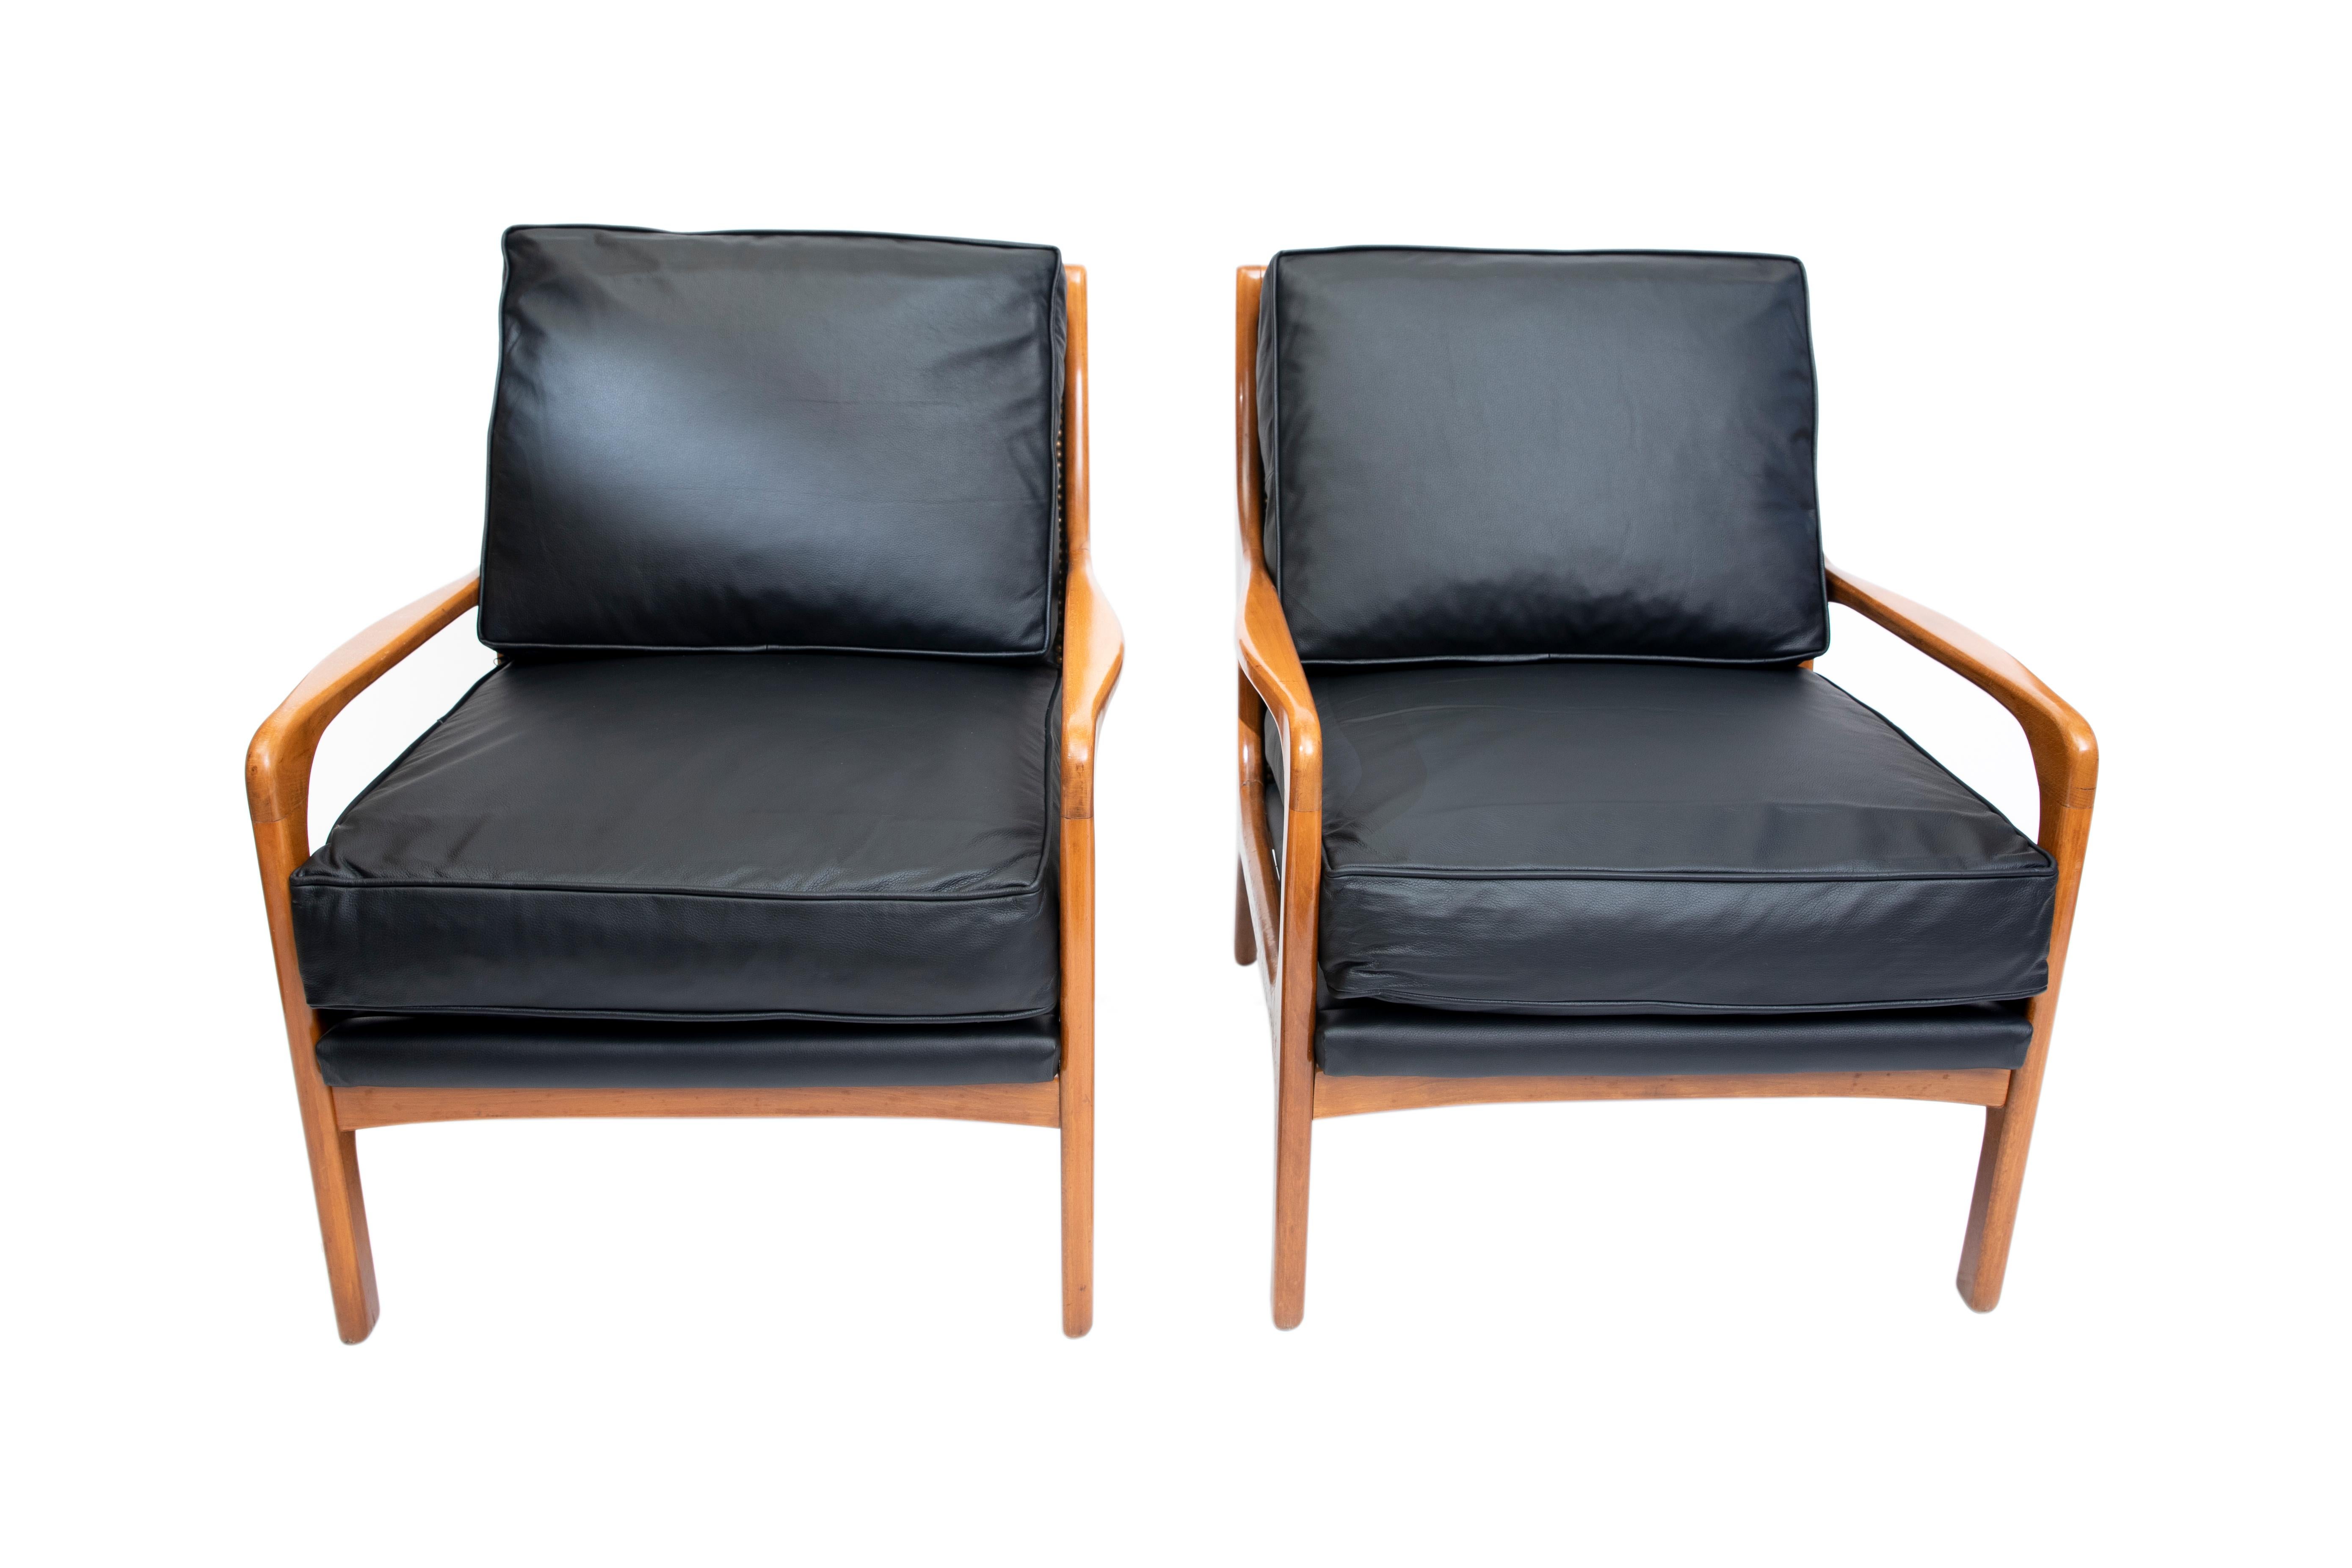 Pair of wood and leather Scandinavian armchairs, circa 1960.